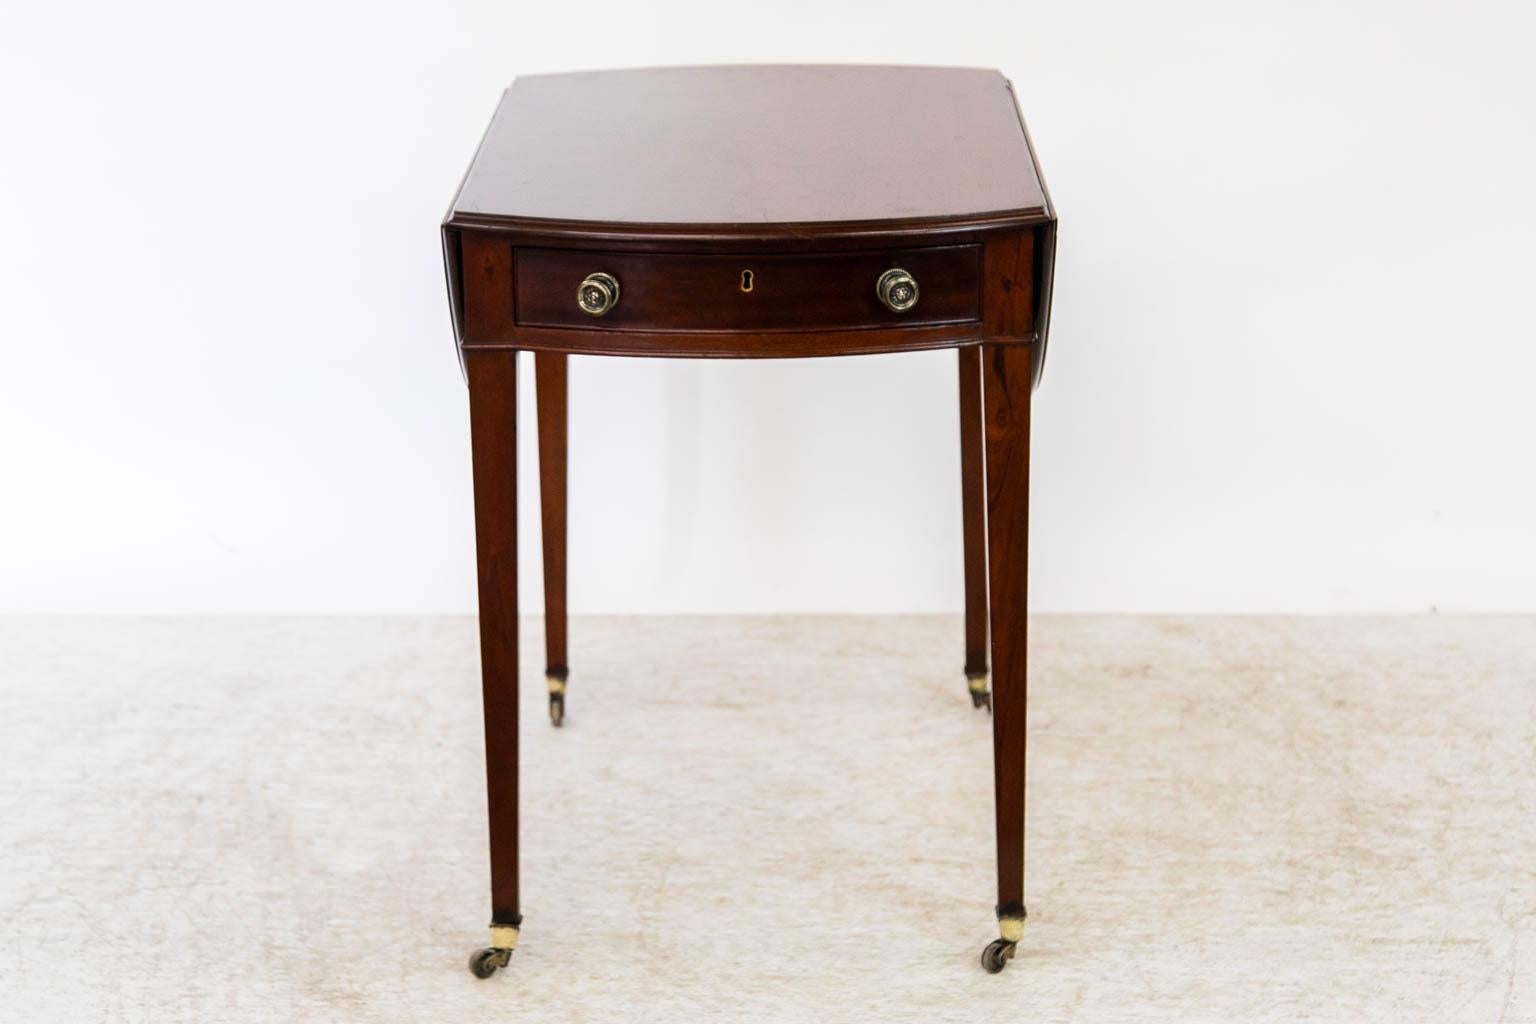 This pembroke table has a one board top in the center over 20 inches wide with no cracks or shrinkage separations. There is a working drawer at one end with a matching dummy front on the opposite end. All of the hardware and castors are original.